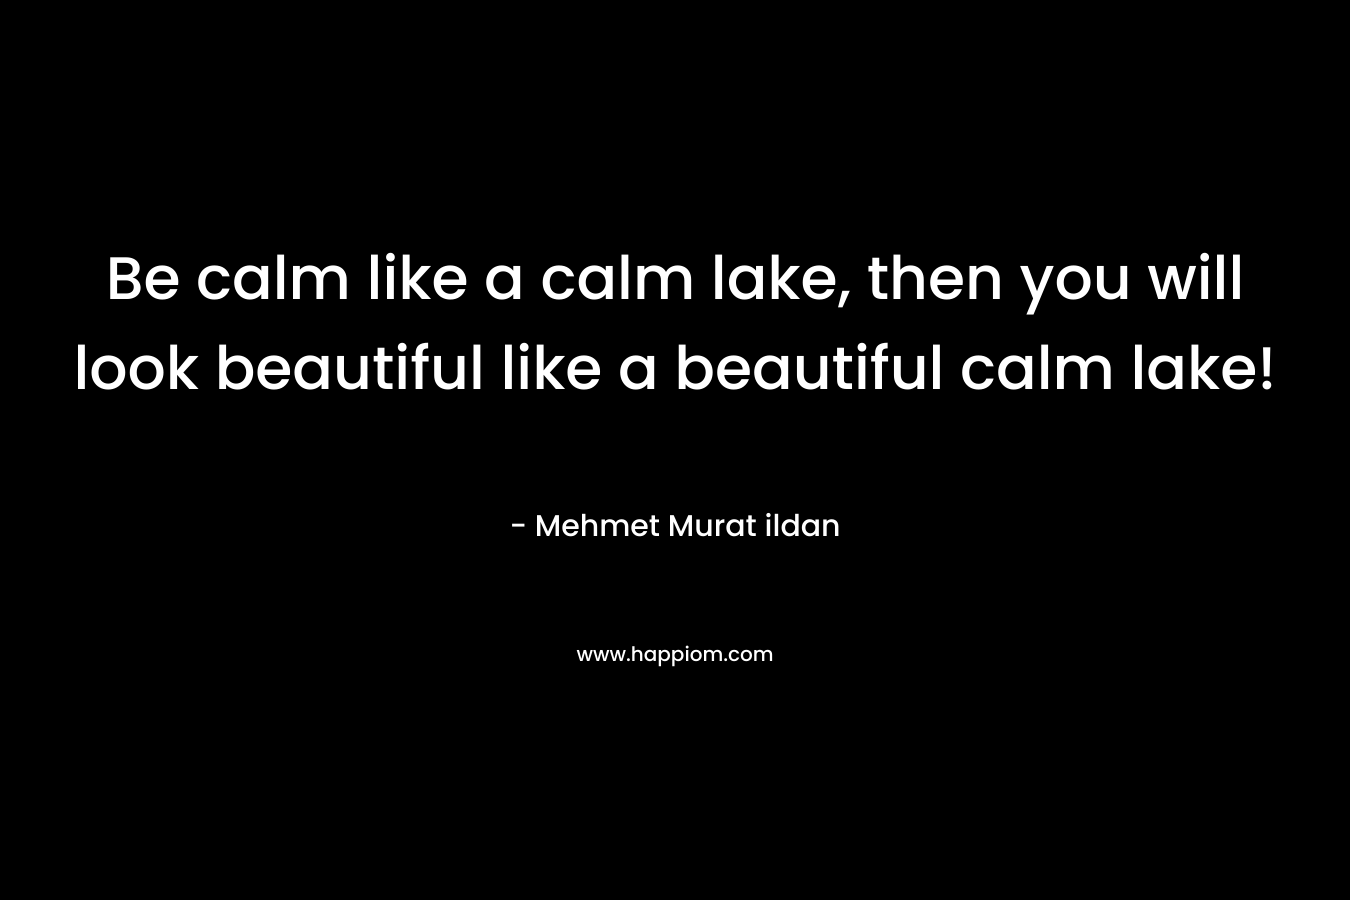 Be calm like a calm lake, then you will look beautiful like a beautiful calm lake! – Mehmet Murat ildan